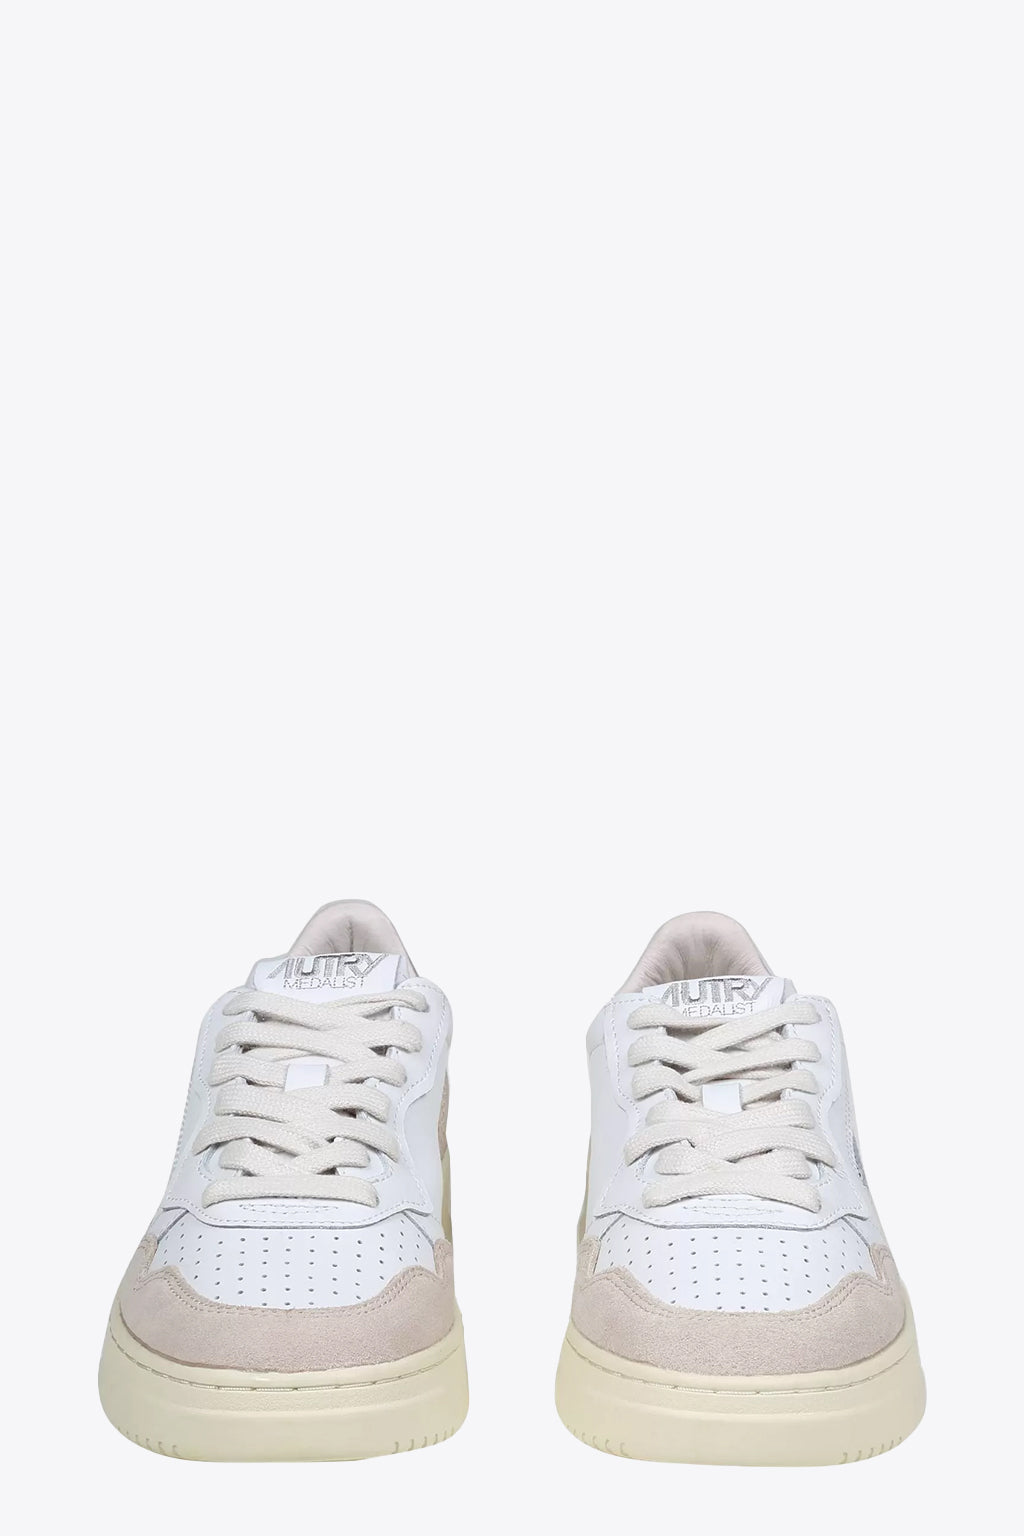 alt-image__White-leather-low-sneaker-with-beige-tab---Medalist